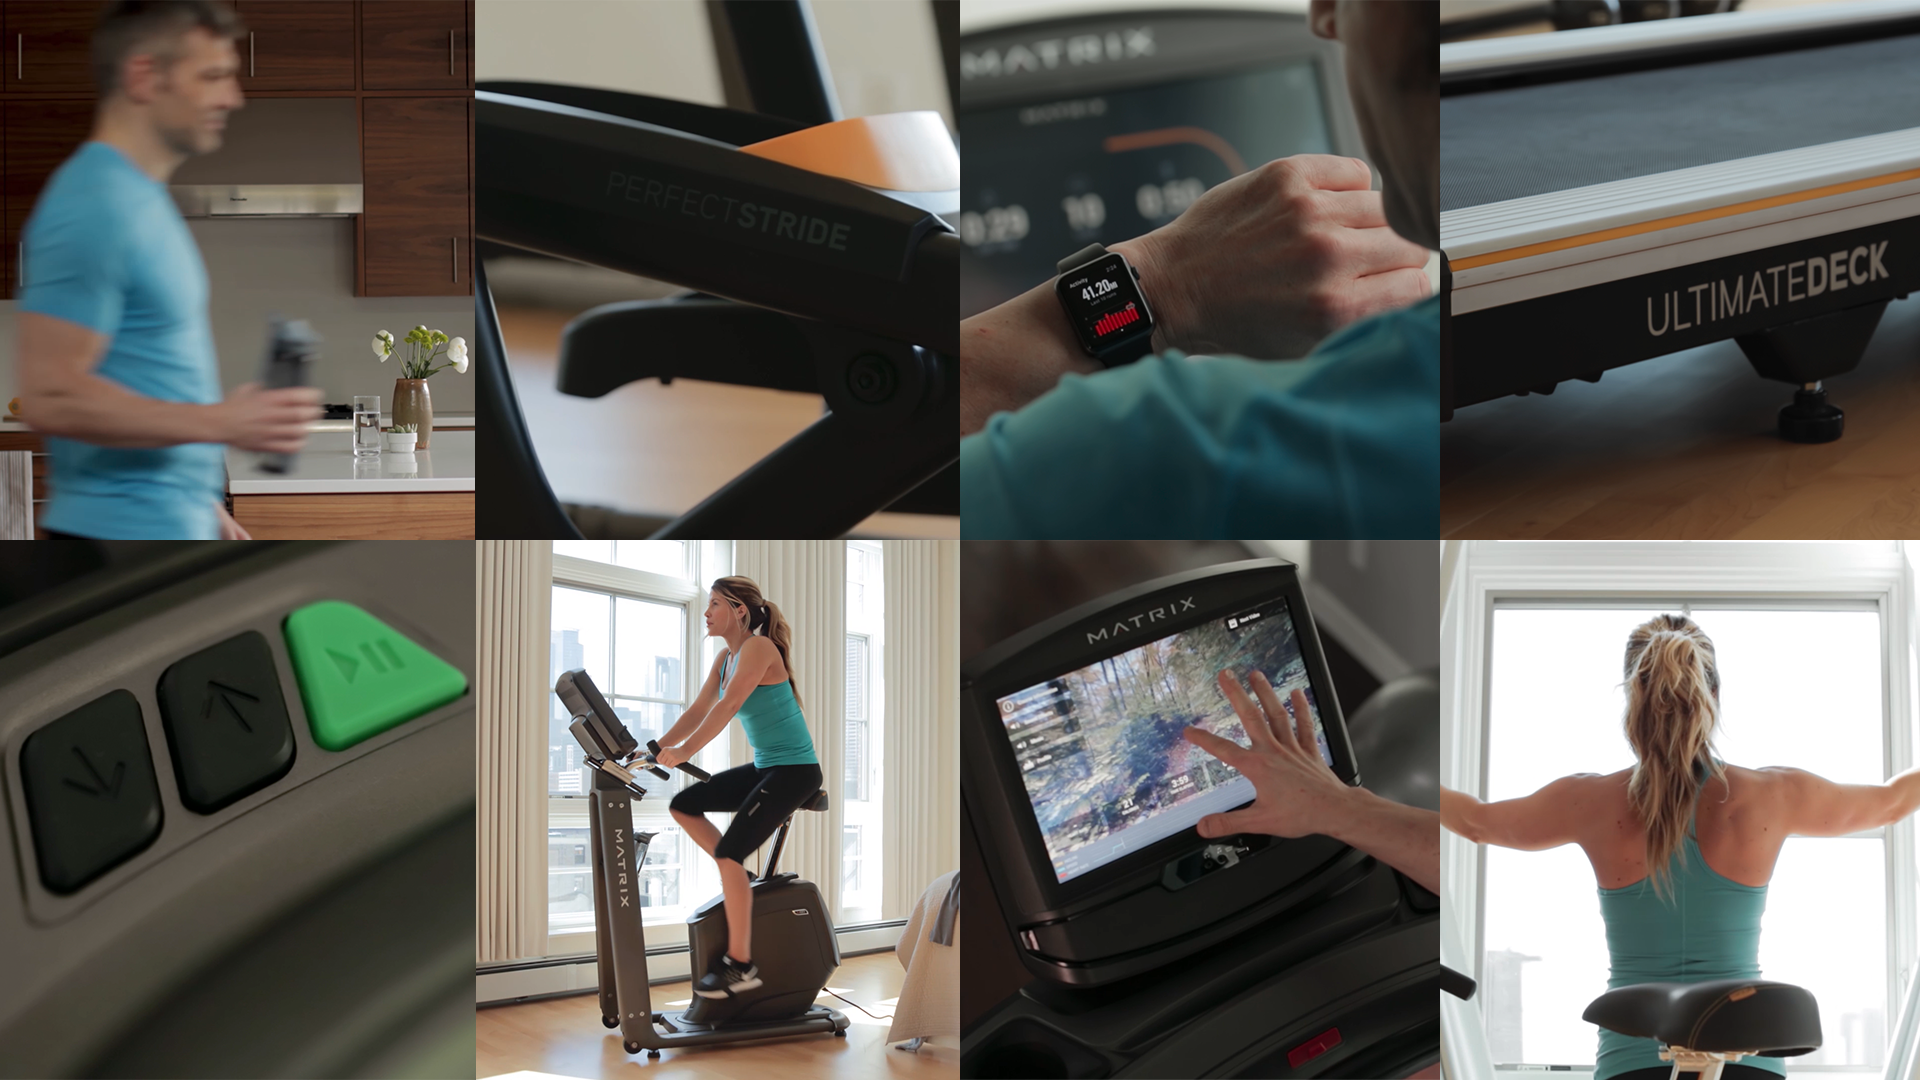 A collage of style frame images showcasing a man walking in his kitchen holding a water bottle, a close up of a man's Apple Watch, a matrix fitness screen, a women on a stationery bike and a women stretching her arms.